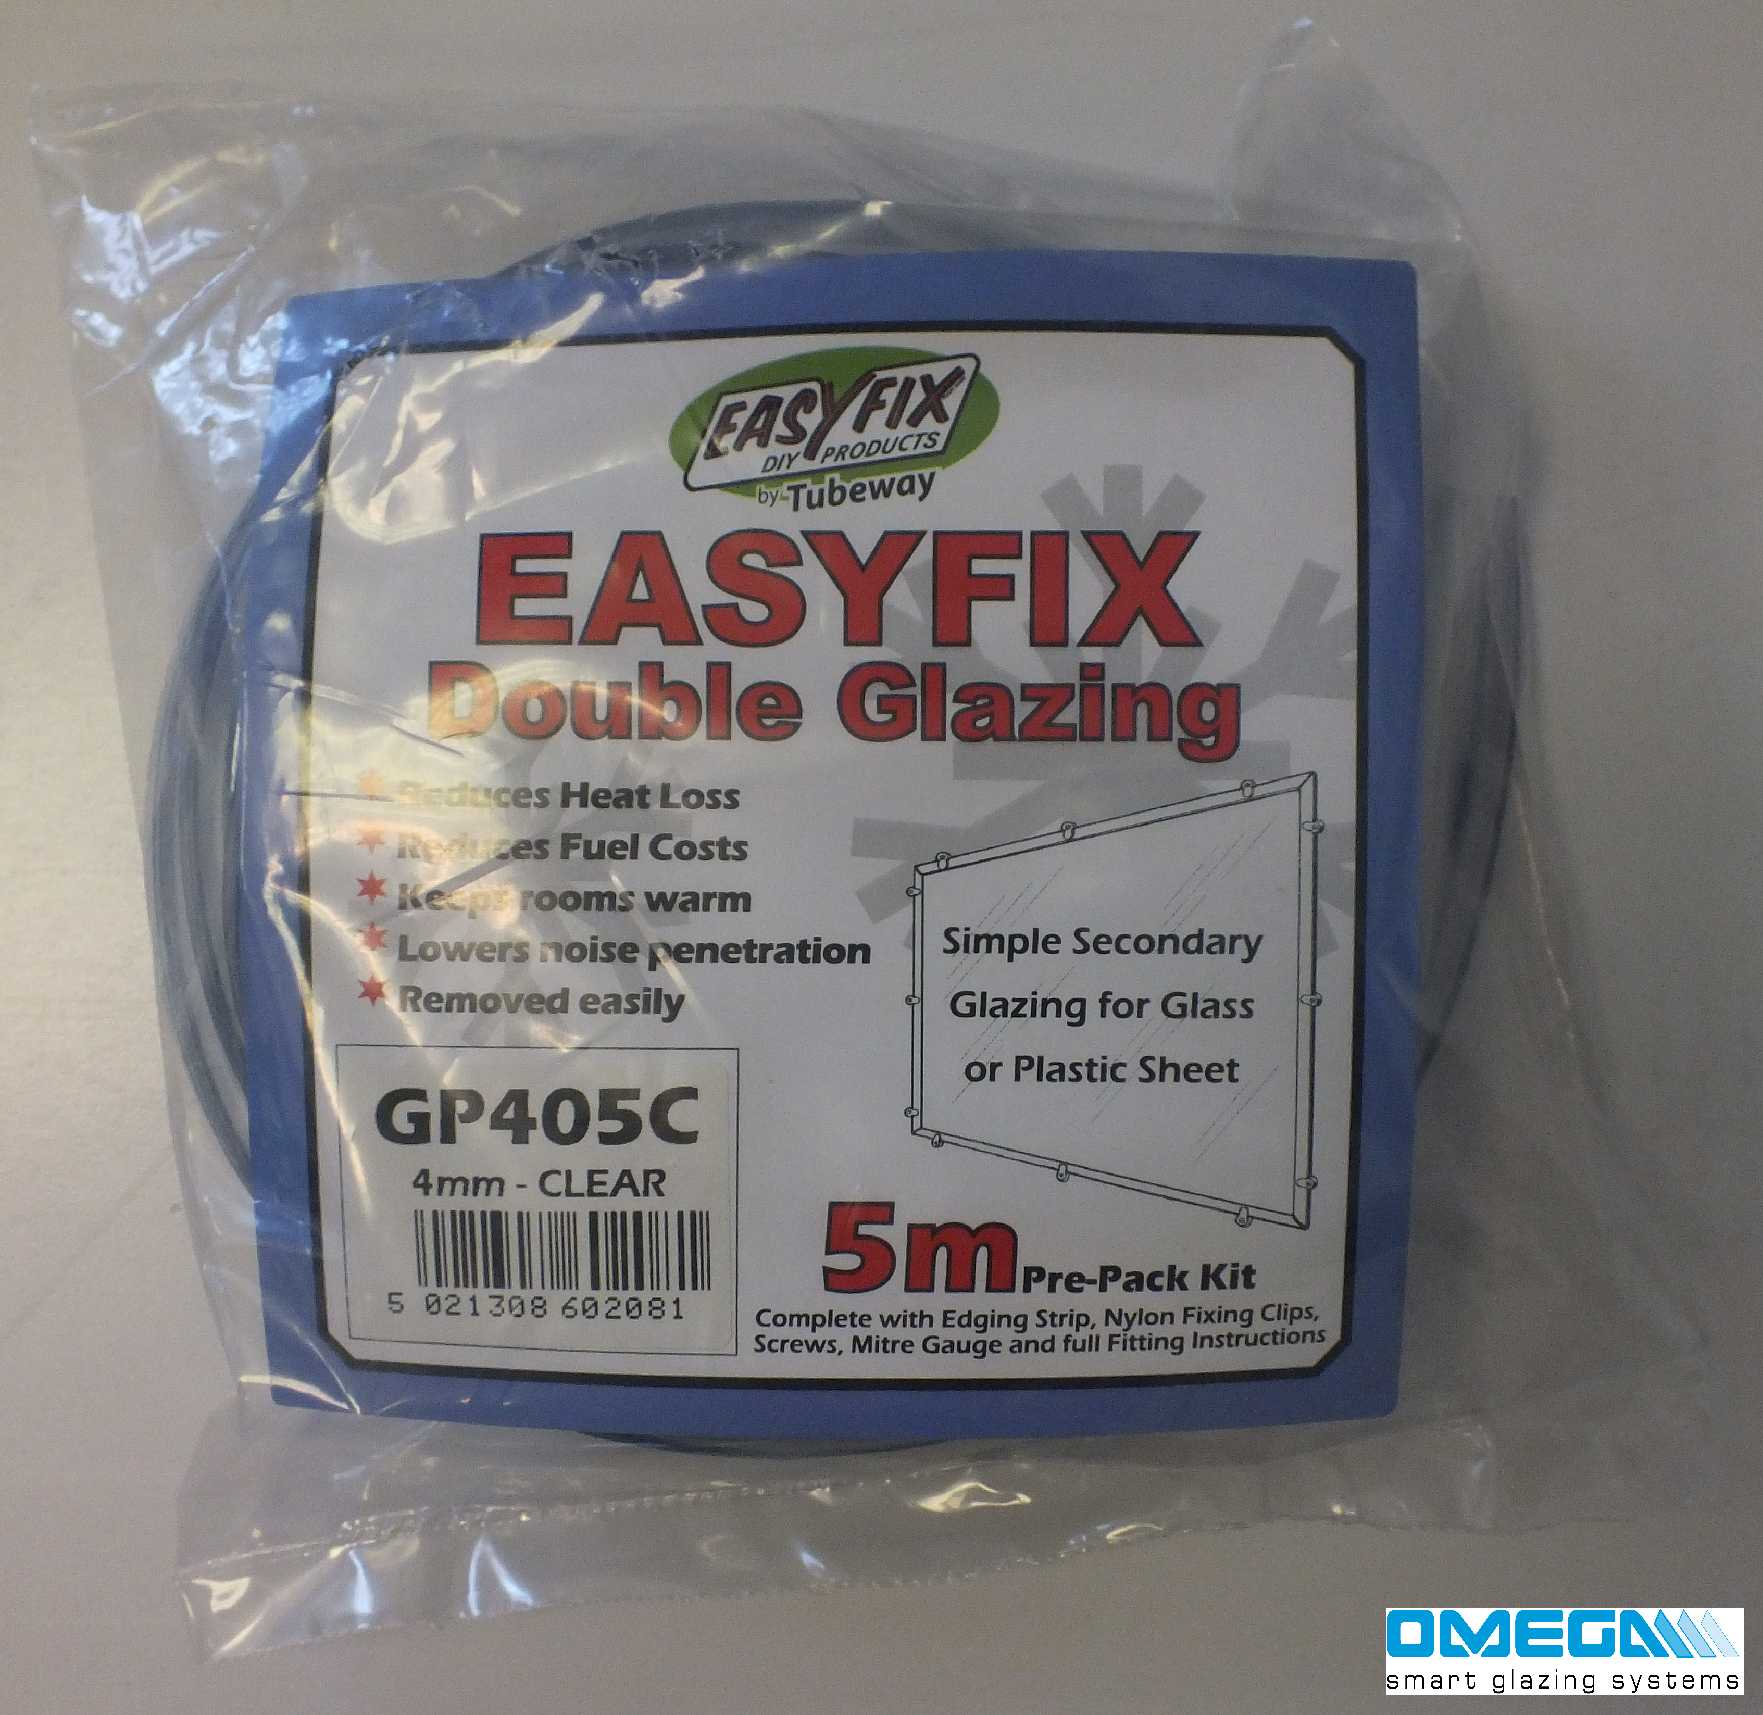 Buy Easyfix Clipglaze Edging Kit - 5m roll of edging for 4mm Glazing Thickness, Clear online today